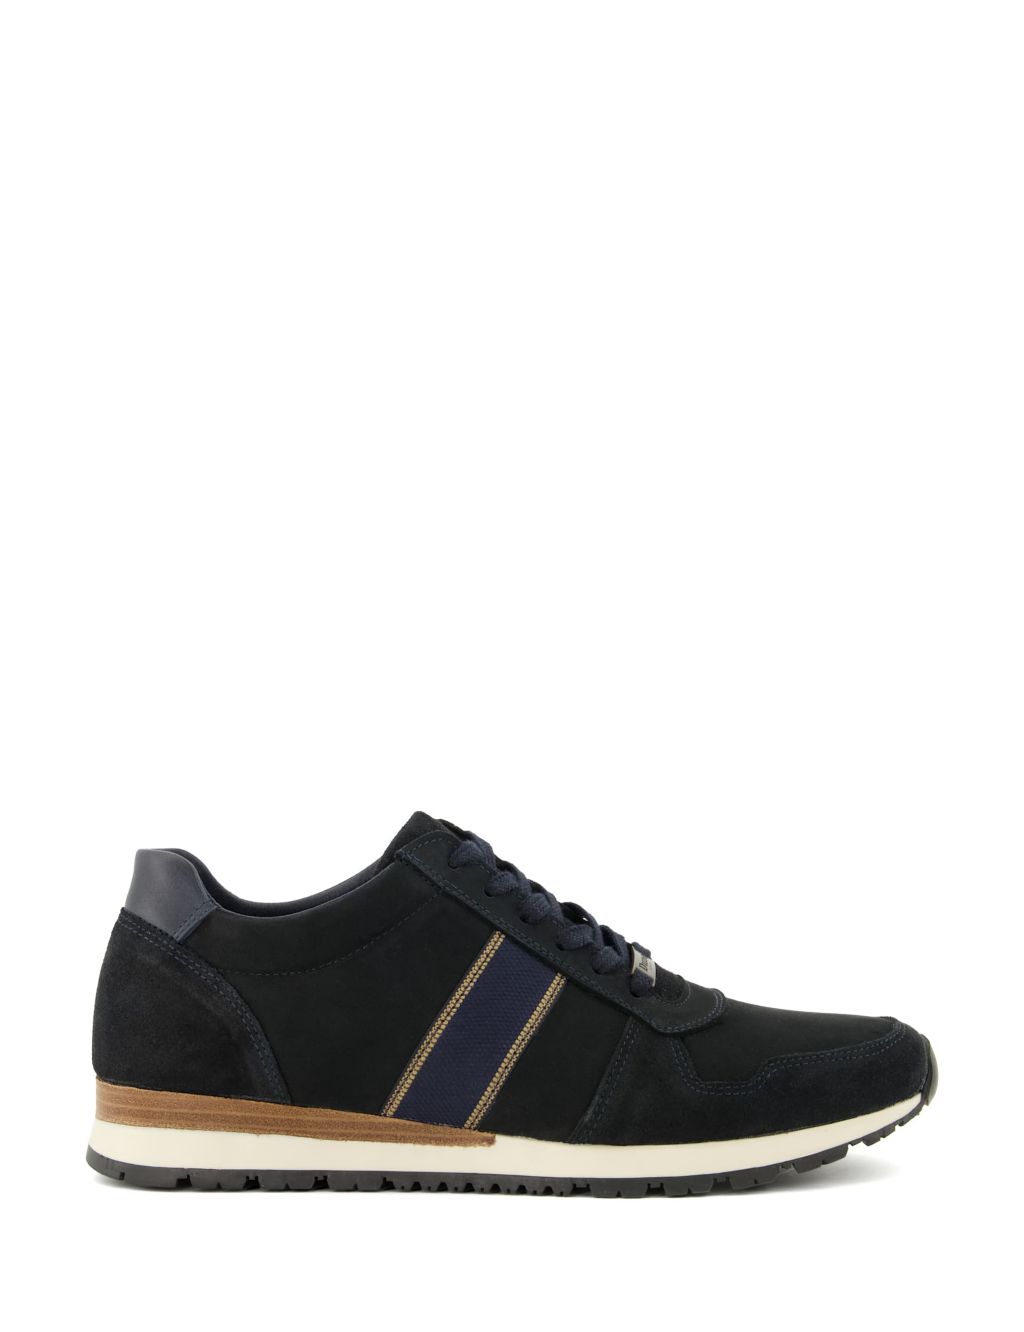 Leather Lace Up Stripe Trainers image 1